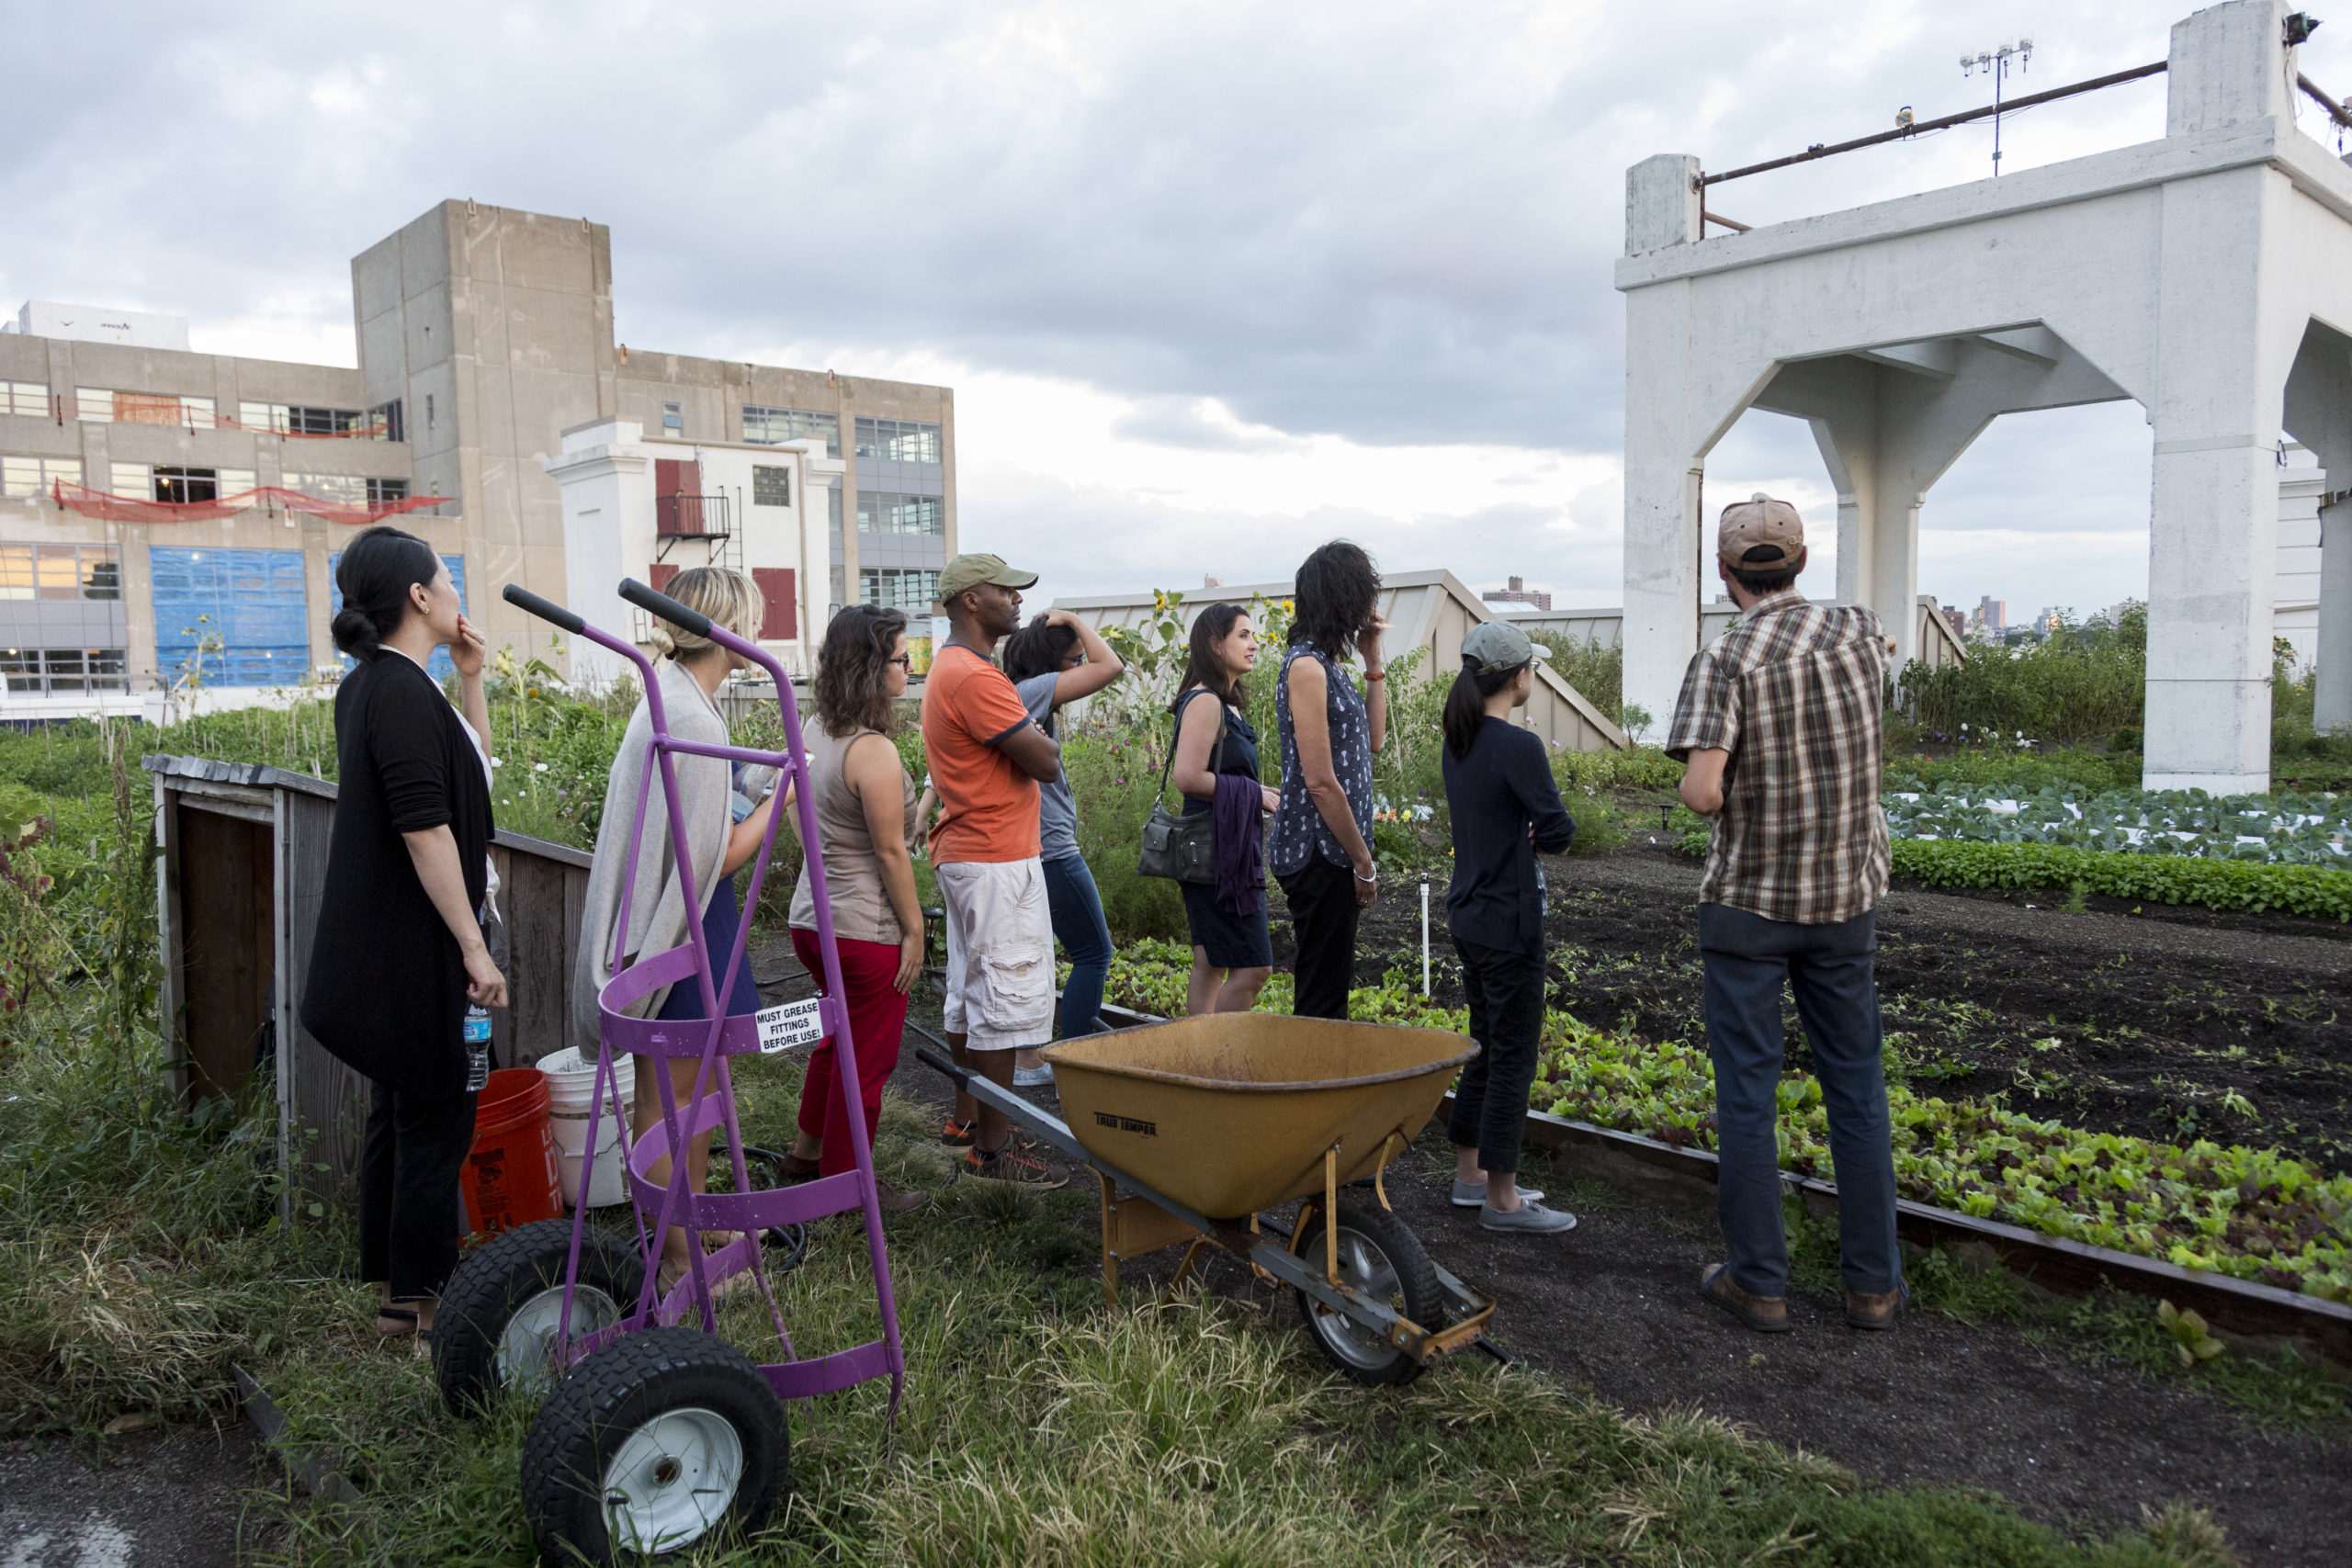 NYU College of Arts and Science students touring the Brooklyn Grange rooftop garden.